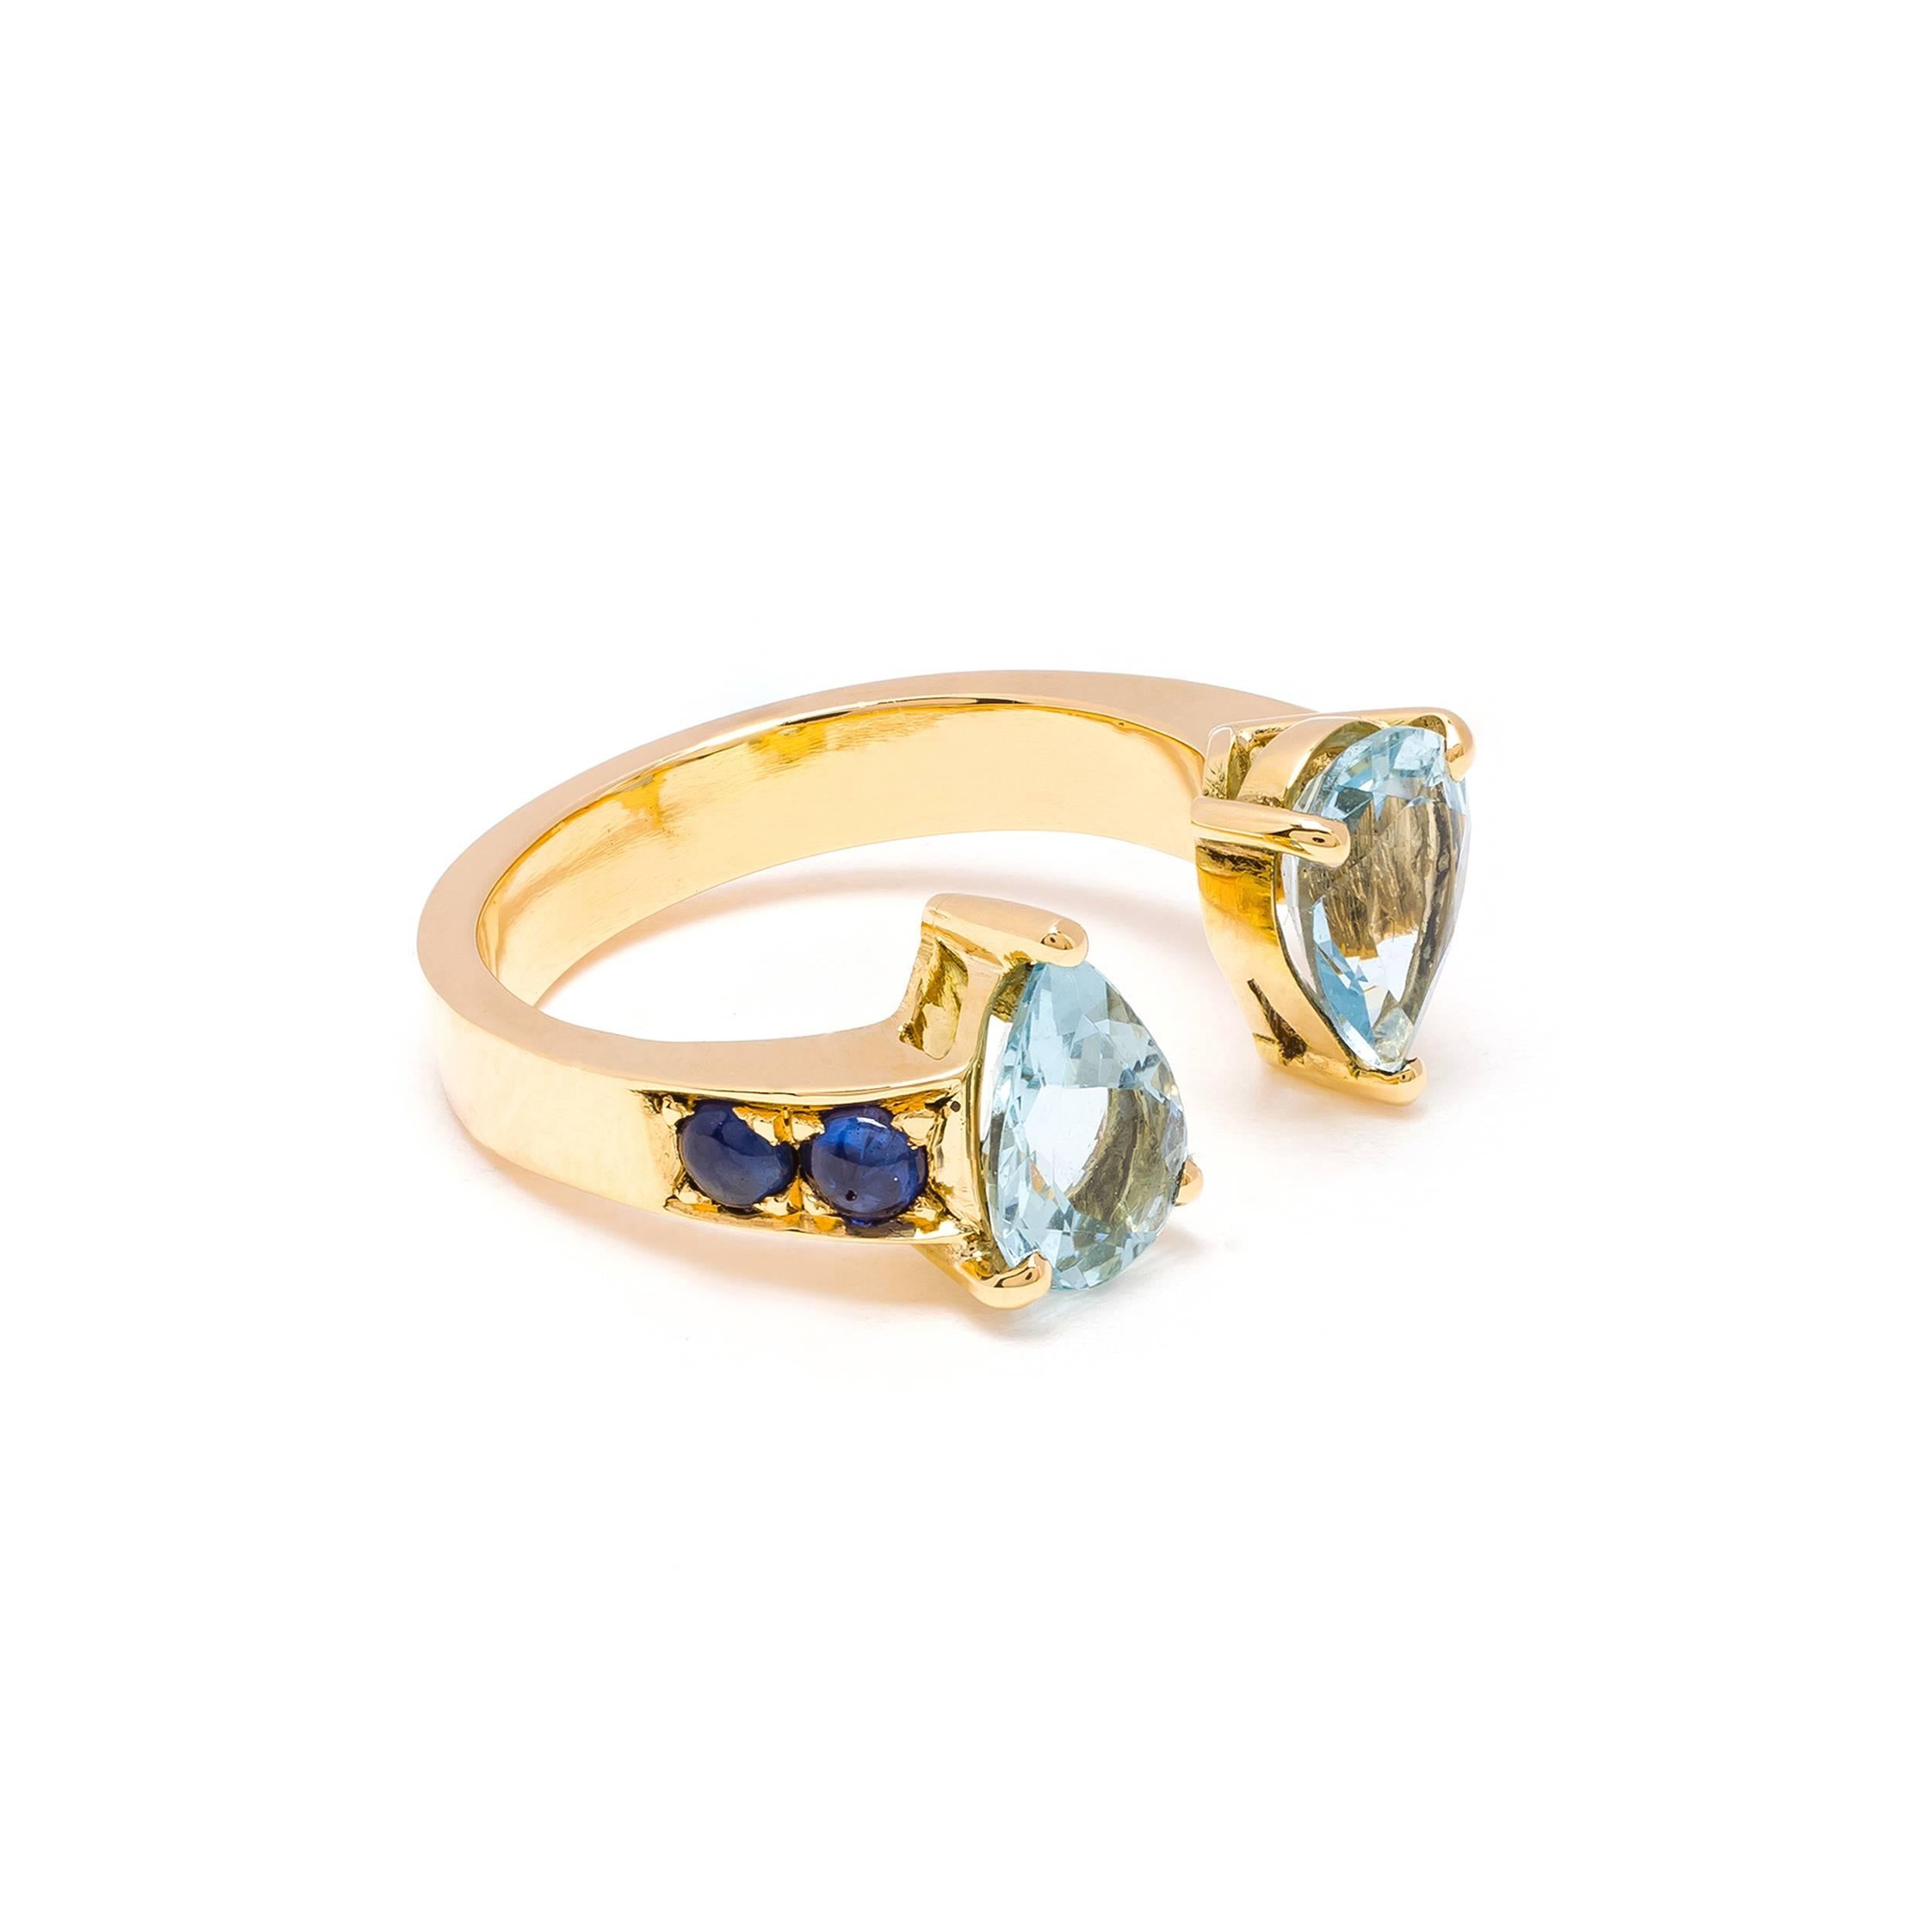 This DUBINI ring from the 'Theodora' collection features aquamarine drops with blue sapphire cabochons set in 18K yellow gold. 

…………………………………………………………………………………………………………………………………………………………………….

Inspired by Empress Theodora, wife of Justinian I, she